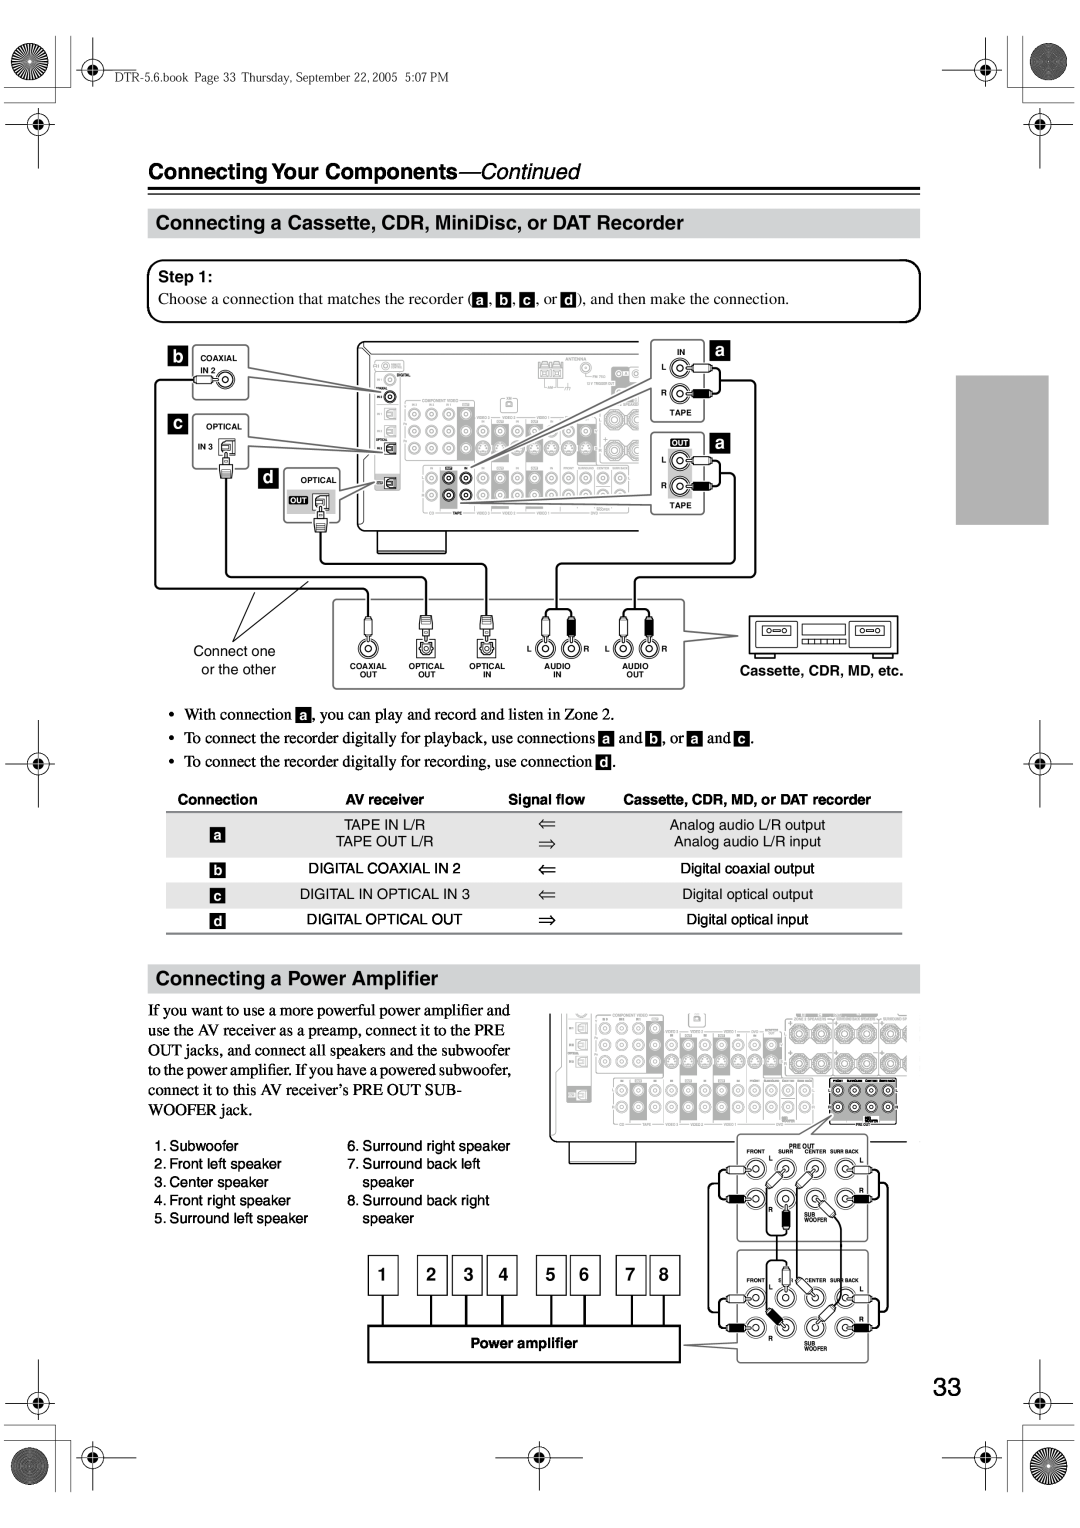 Integra DTR-5.6 instruction manual Connecting a Power Ampliﬁer, Connecting Your Components—Continued 